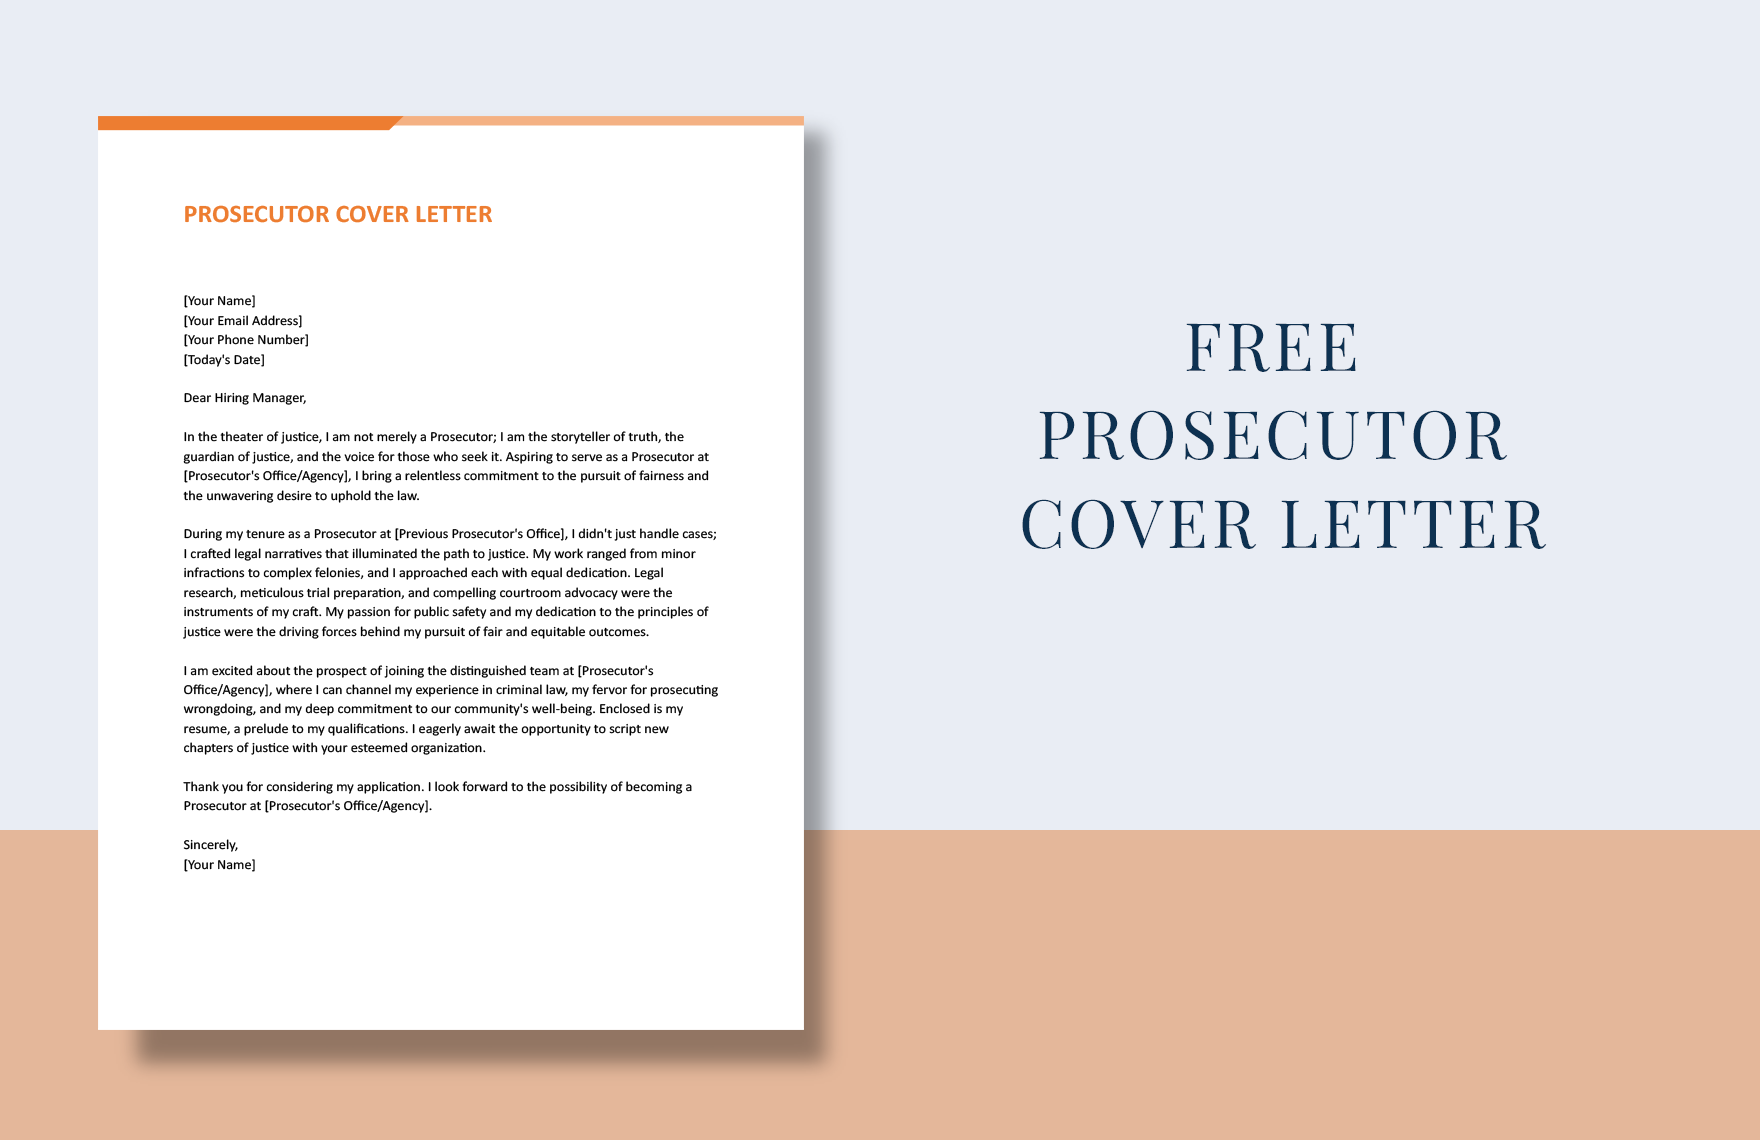 free-prosecutor-cover-letter-download-in-word-google-docs-template